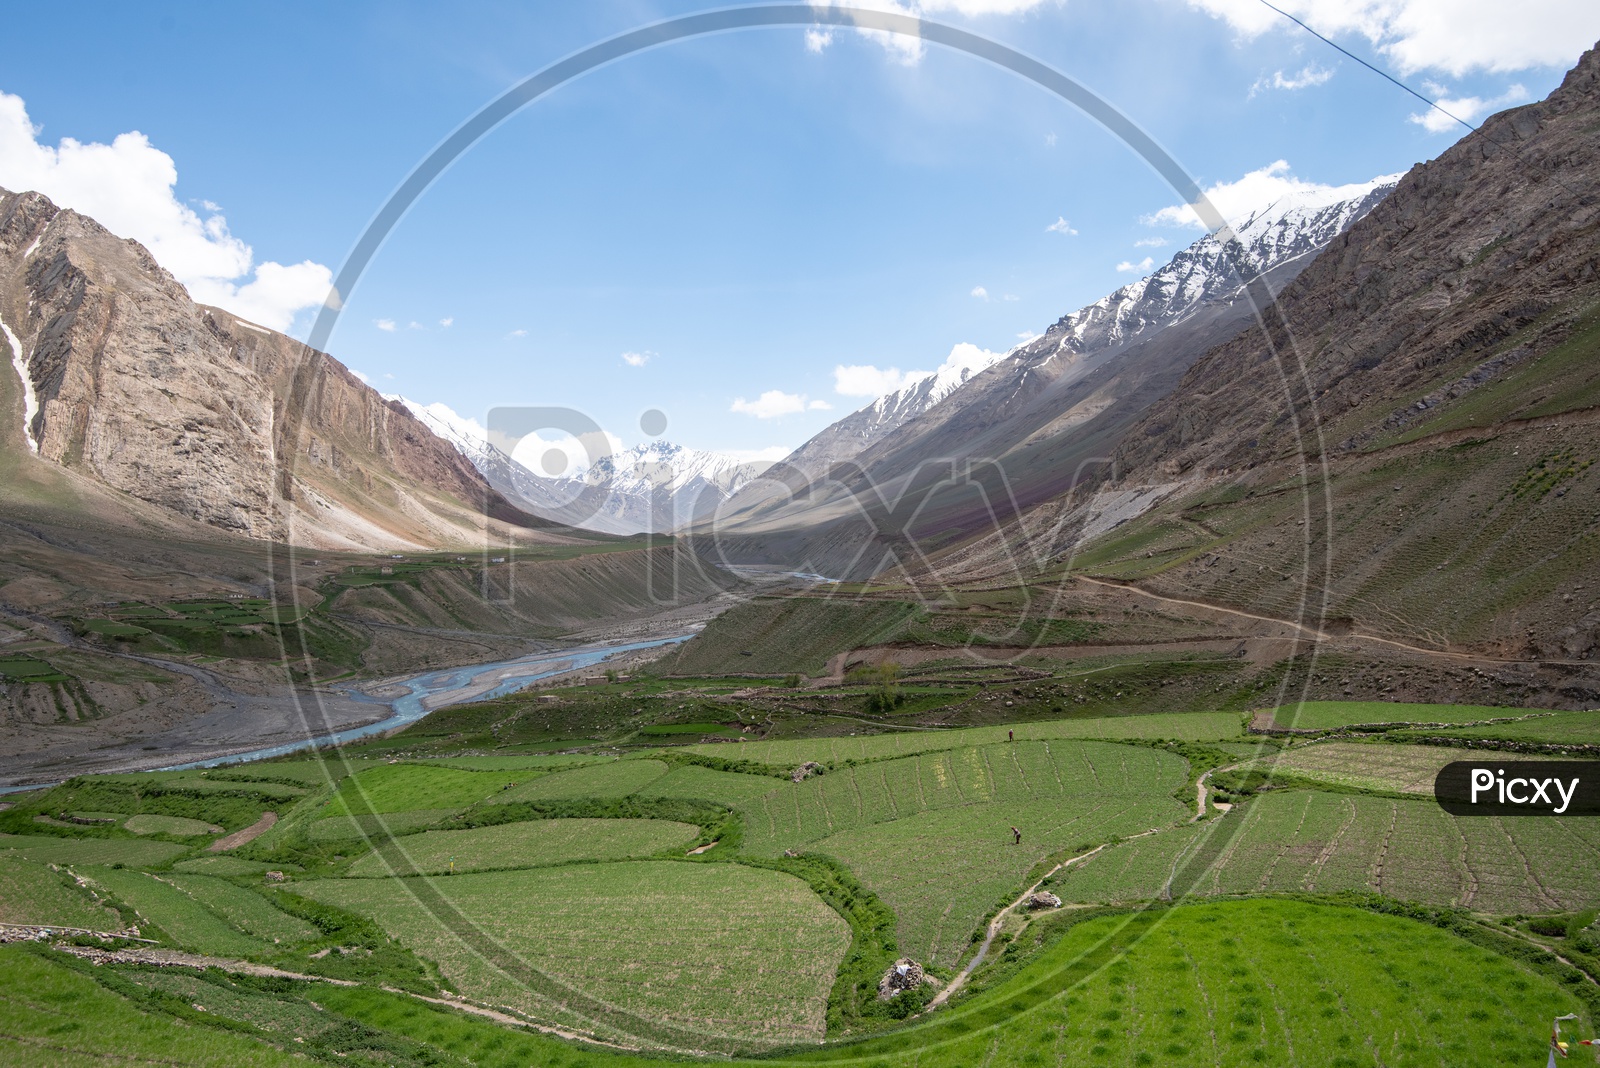 Agricultural farm lands in the Spiti Valley with snow clad mountains in the background